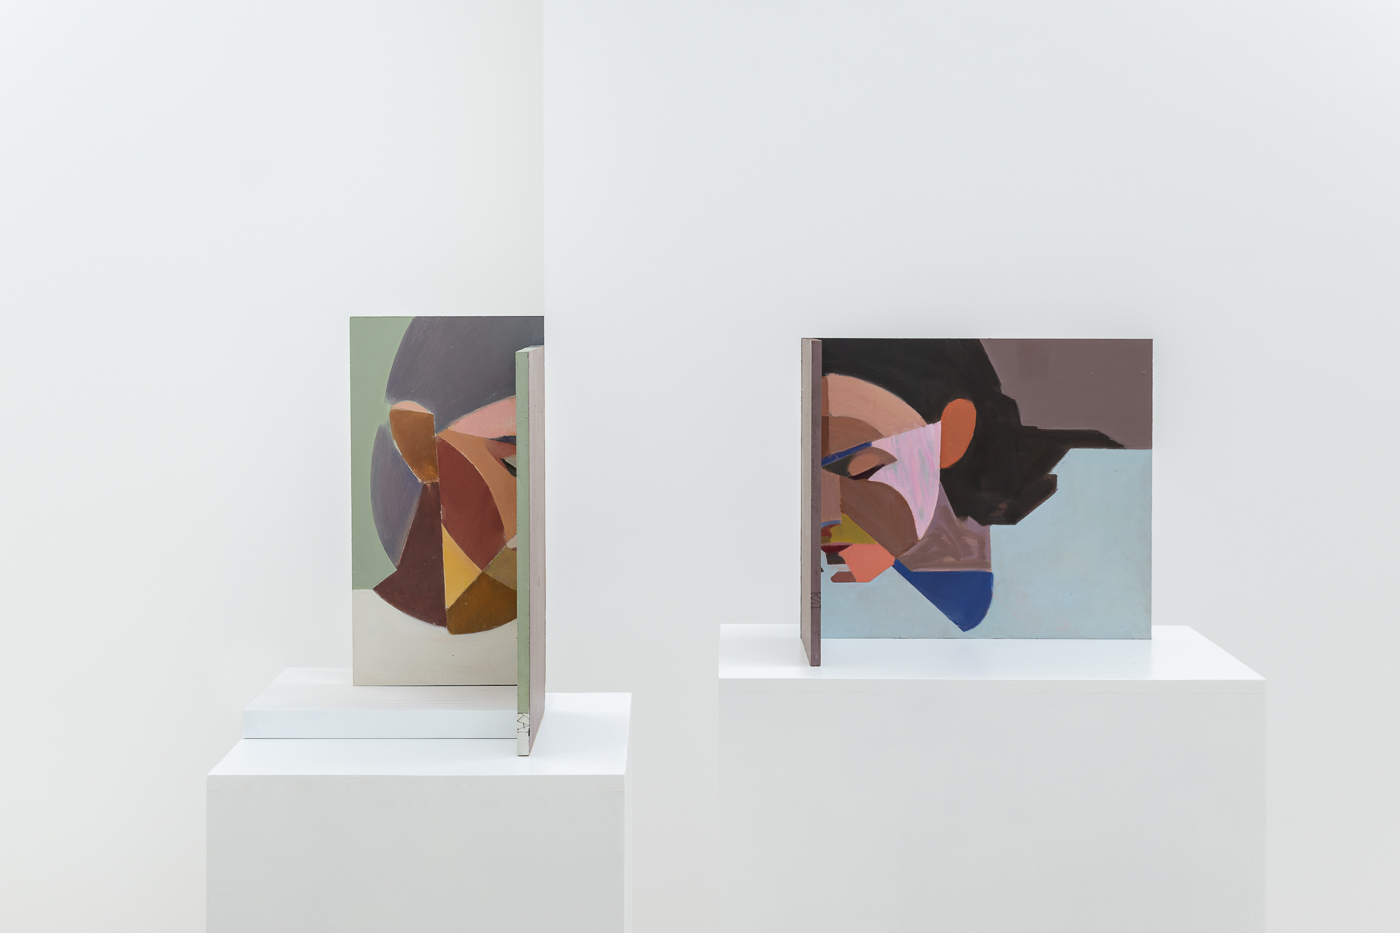 Installation image for Kat Kristof: Her & The Self, at BEERS London